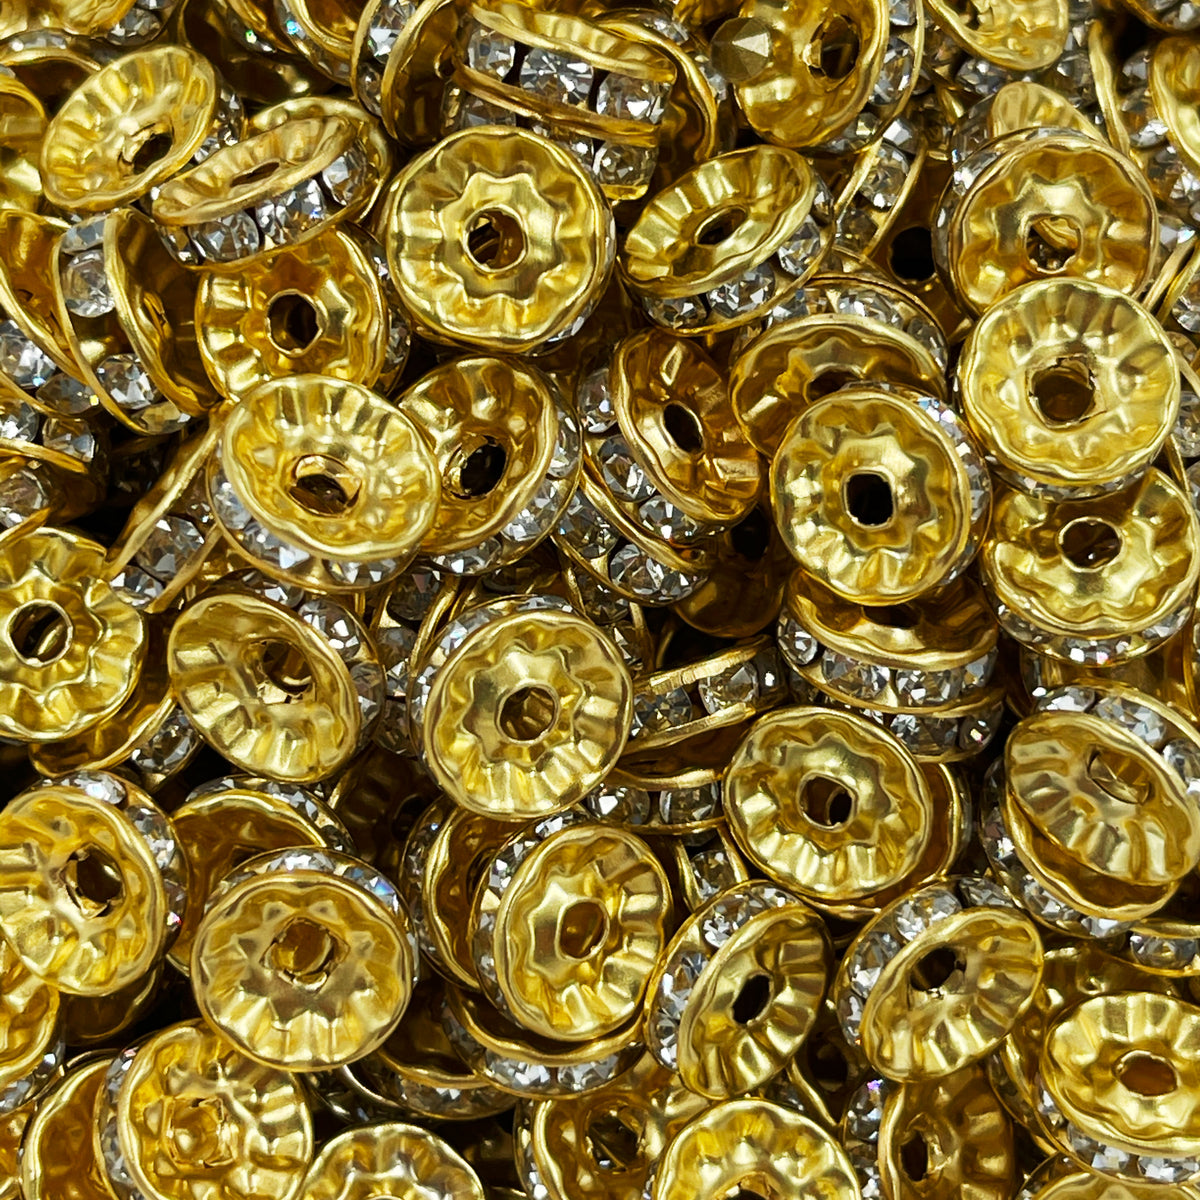 10mm Gold Rondelle Spacer Beads - Set of 20